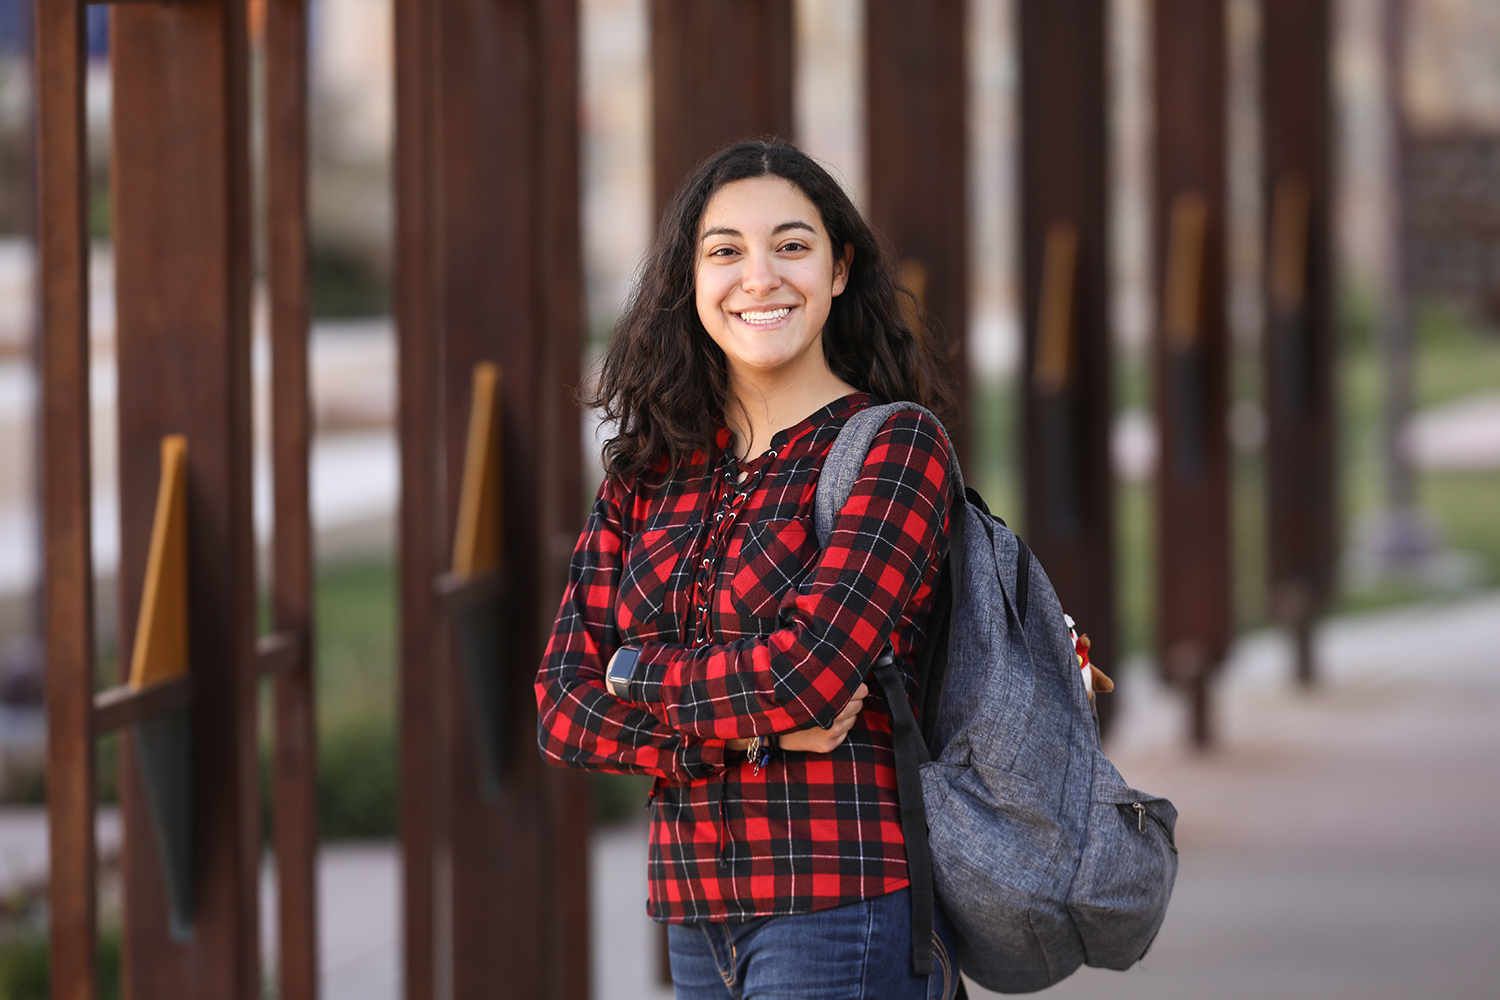 As a member of The University of Texas at El Paso marching band, Zarena Dominguez is comfortable with the concept of working hard and staying focused. She hopes that attention to detail will lead to a career in veterinary medicine. Photo by J.R. Hernandez / UTEP Communications 